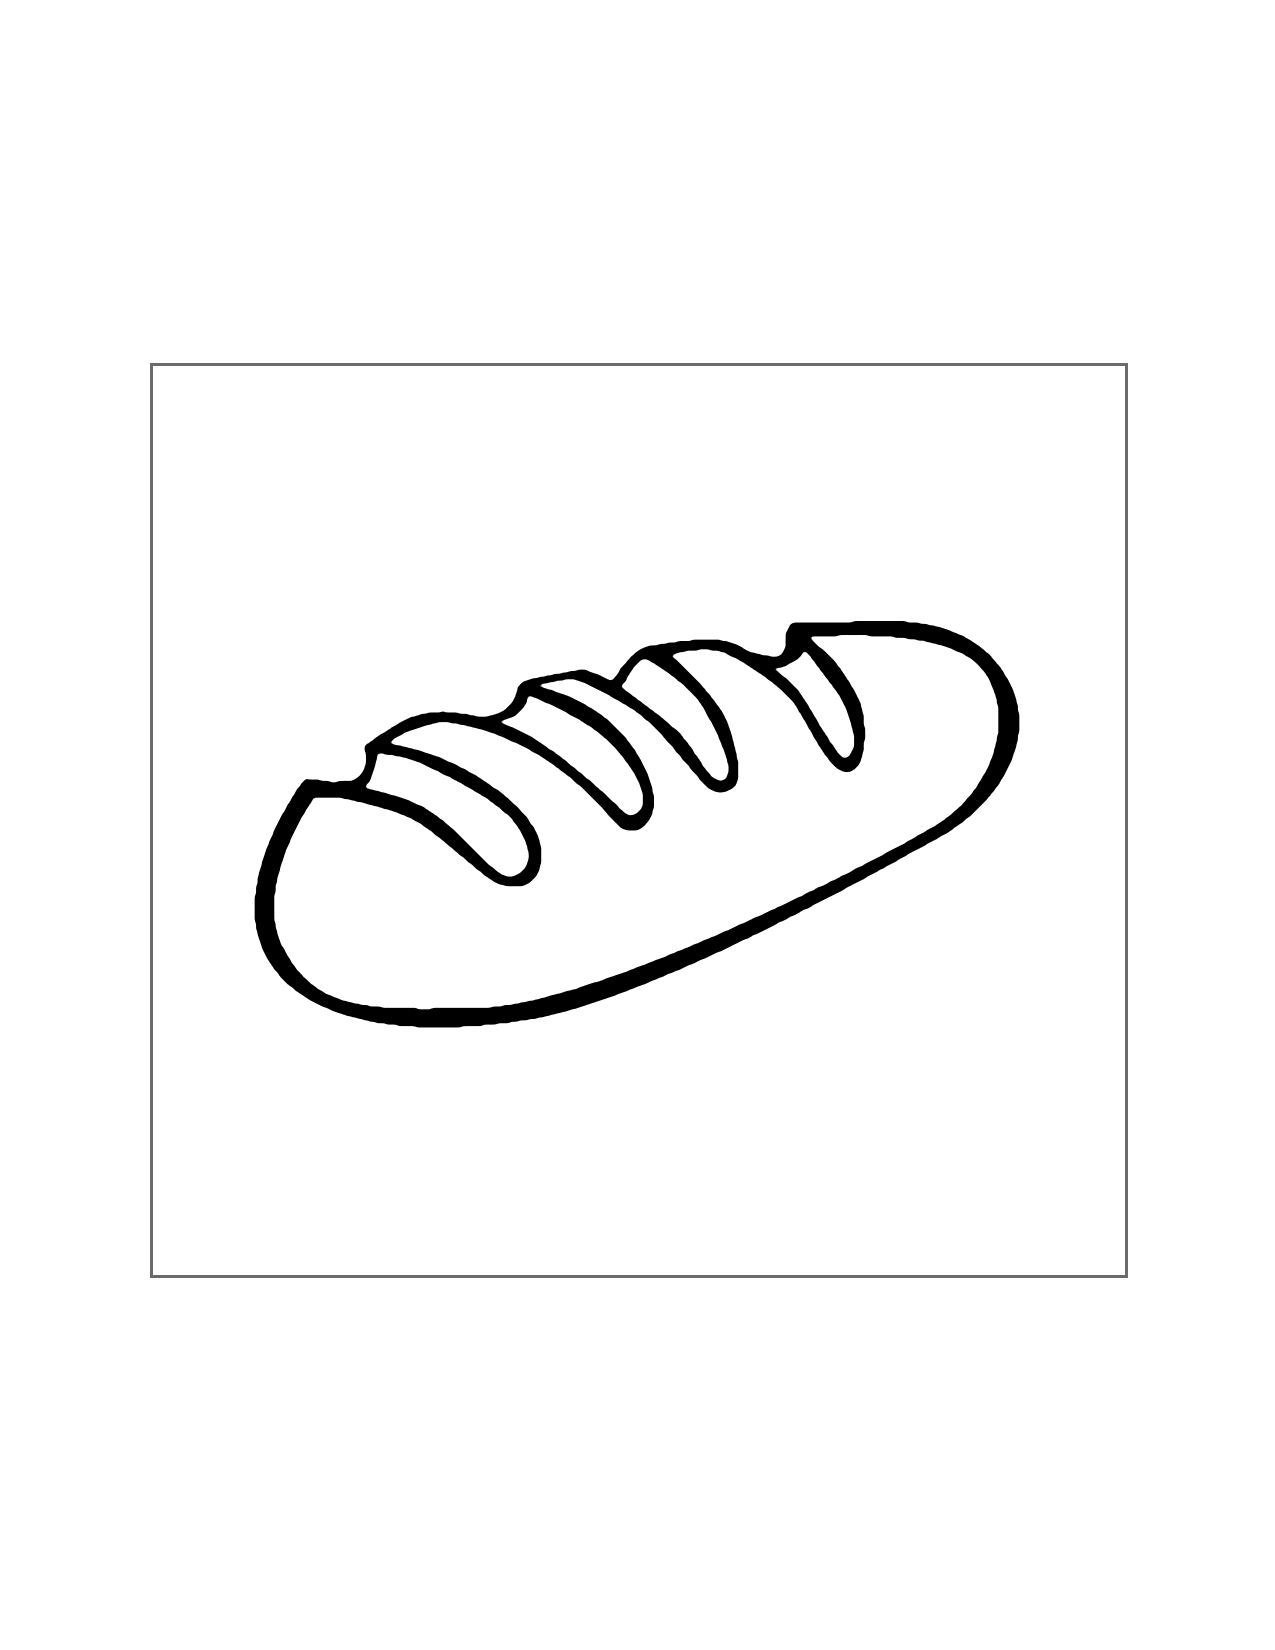 Easy Bread Loaf Coloring Page